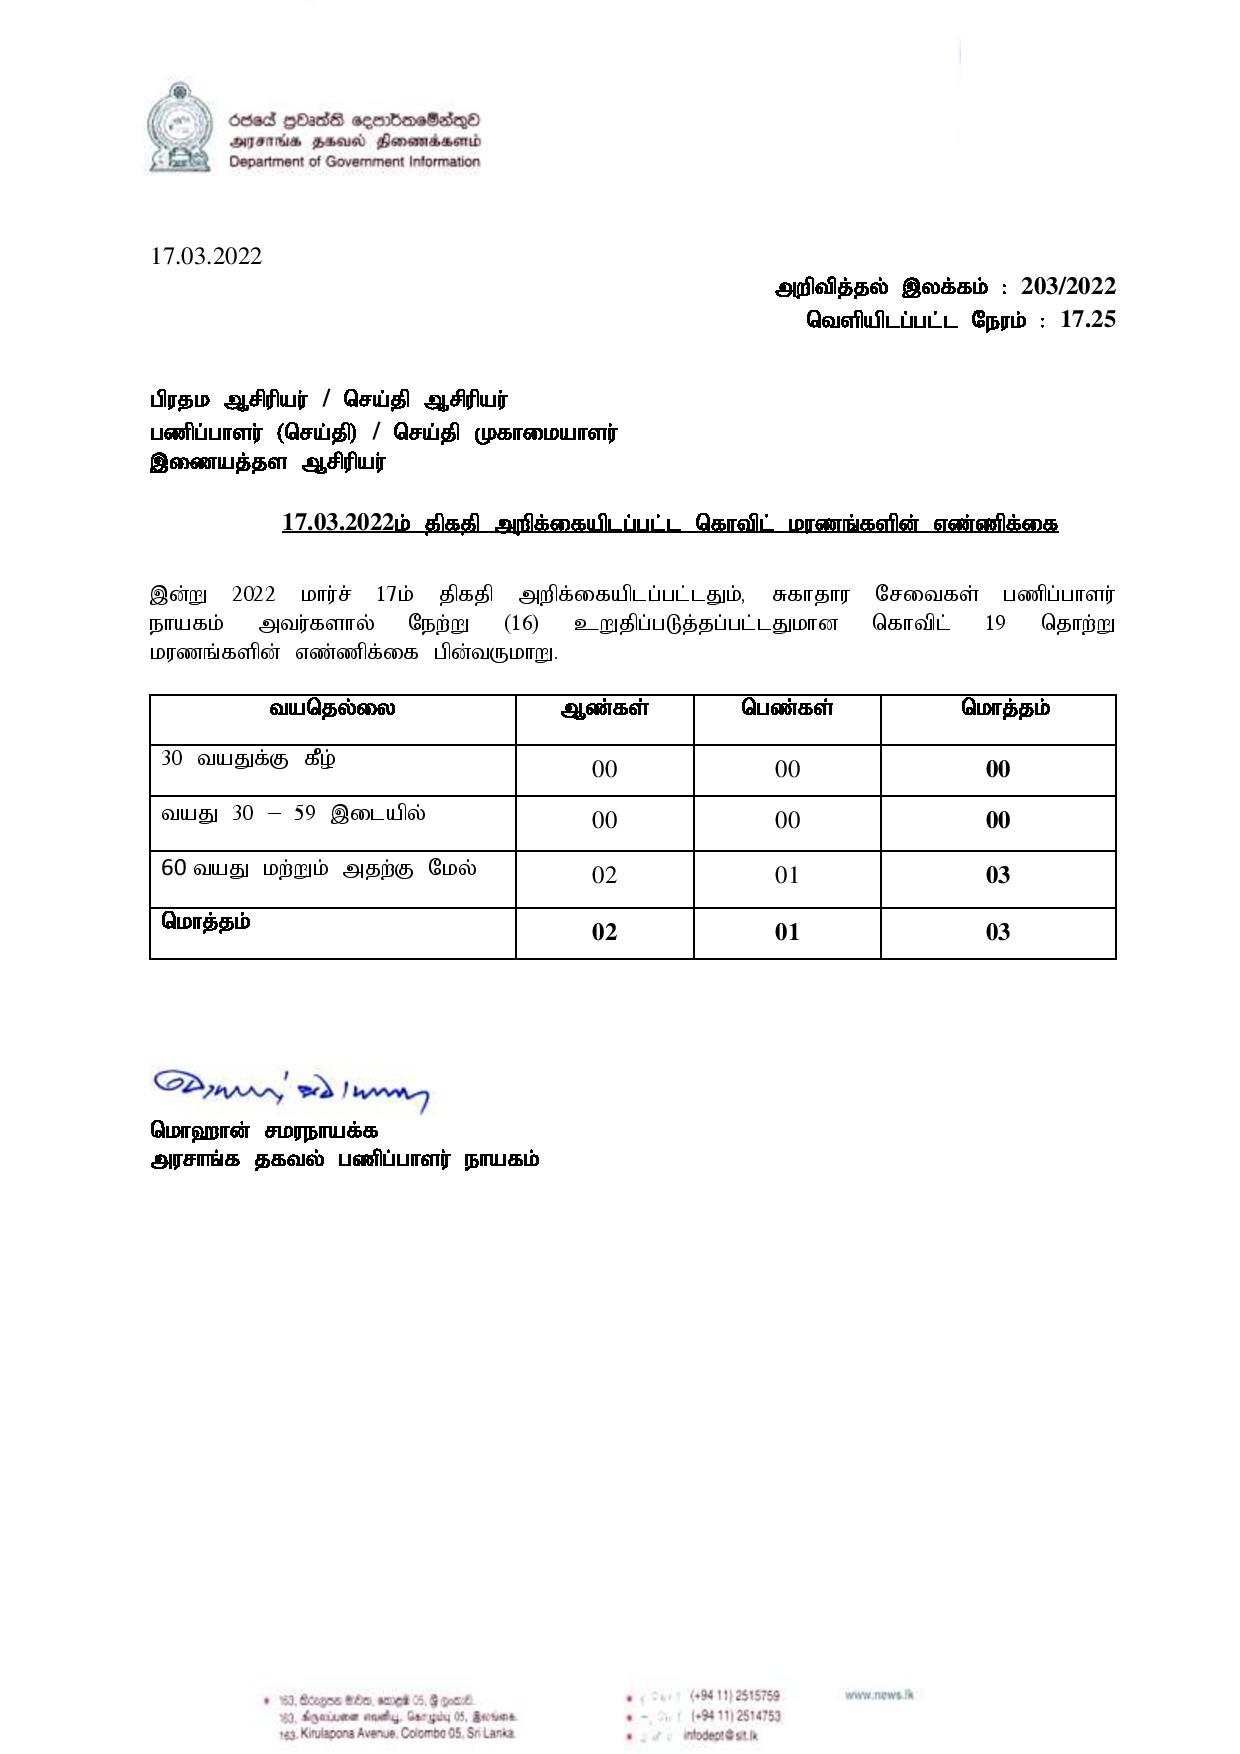 Release No 203Tamil page 001